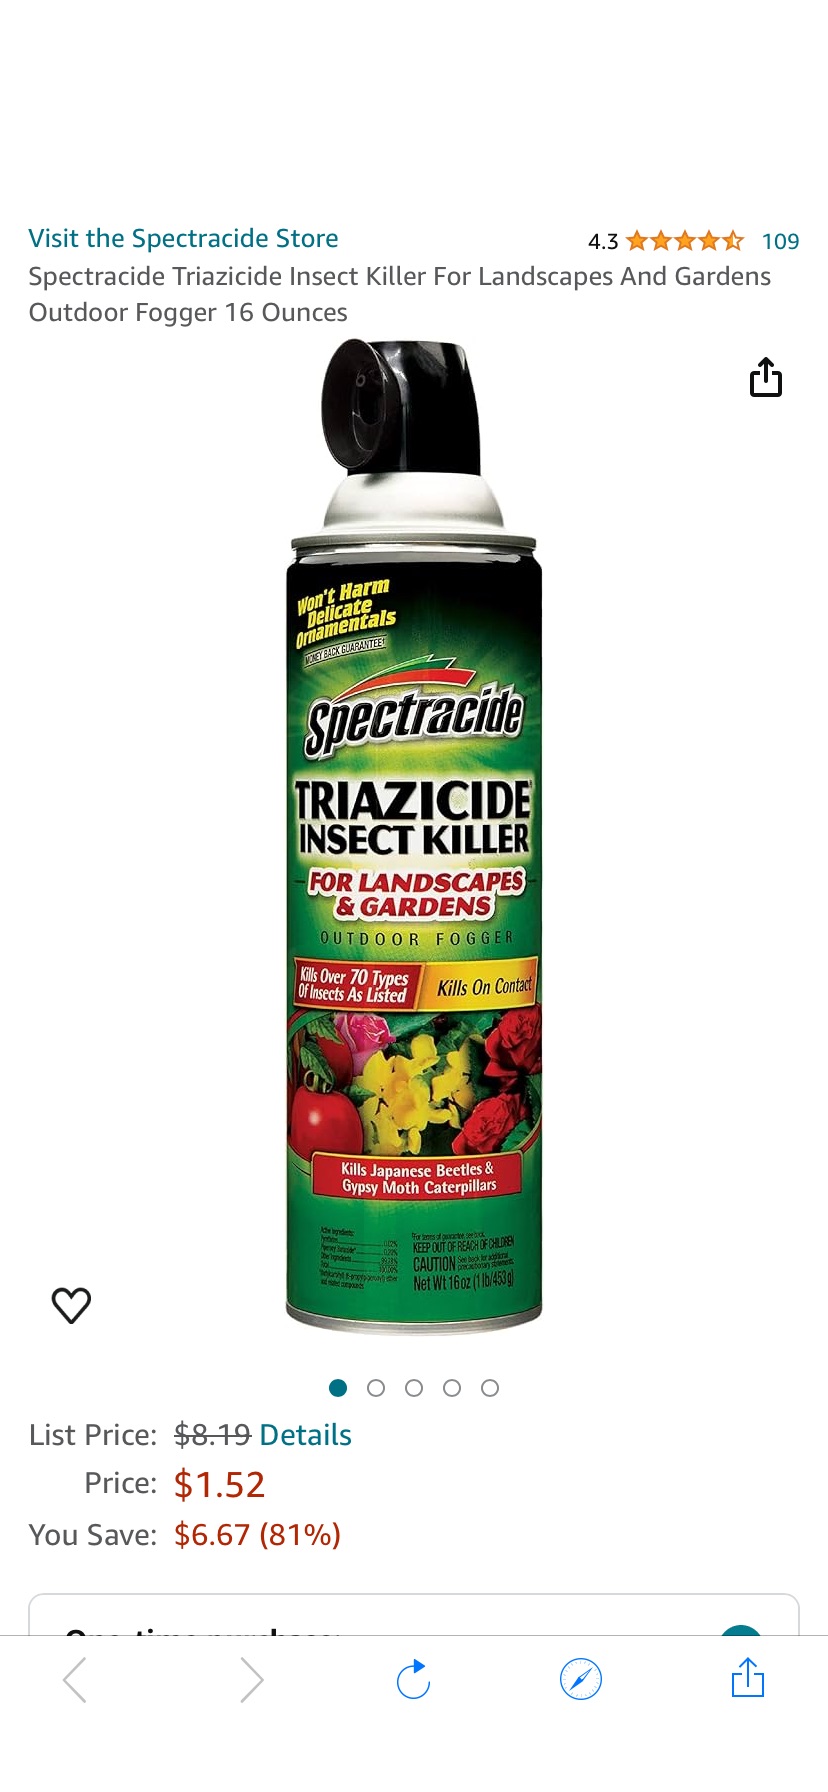 Amazon.com: Spectracide Triazicide Insect Killer For Landscapes And Gardens Outdoor Fogger 16 Ounces : Patio, Lawn & Garden